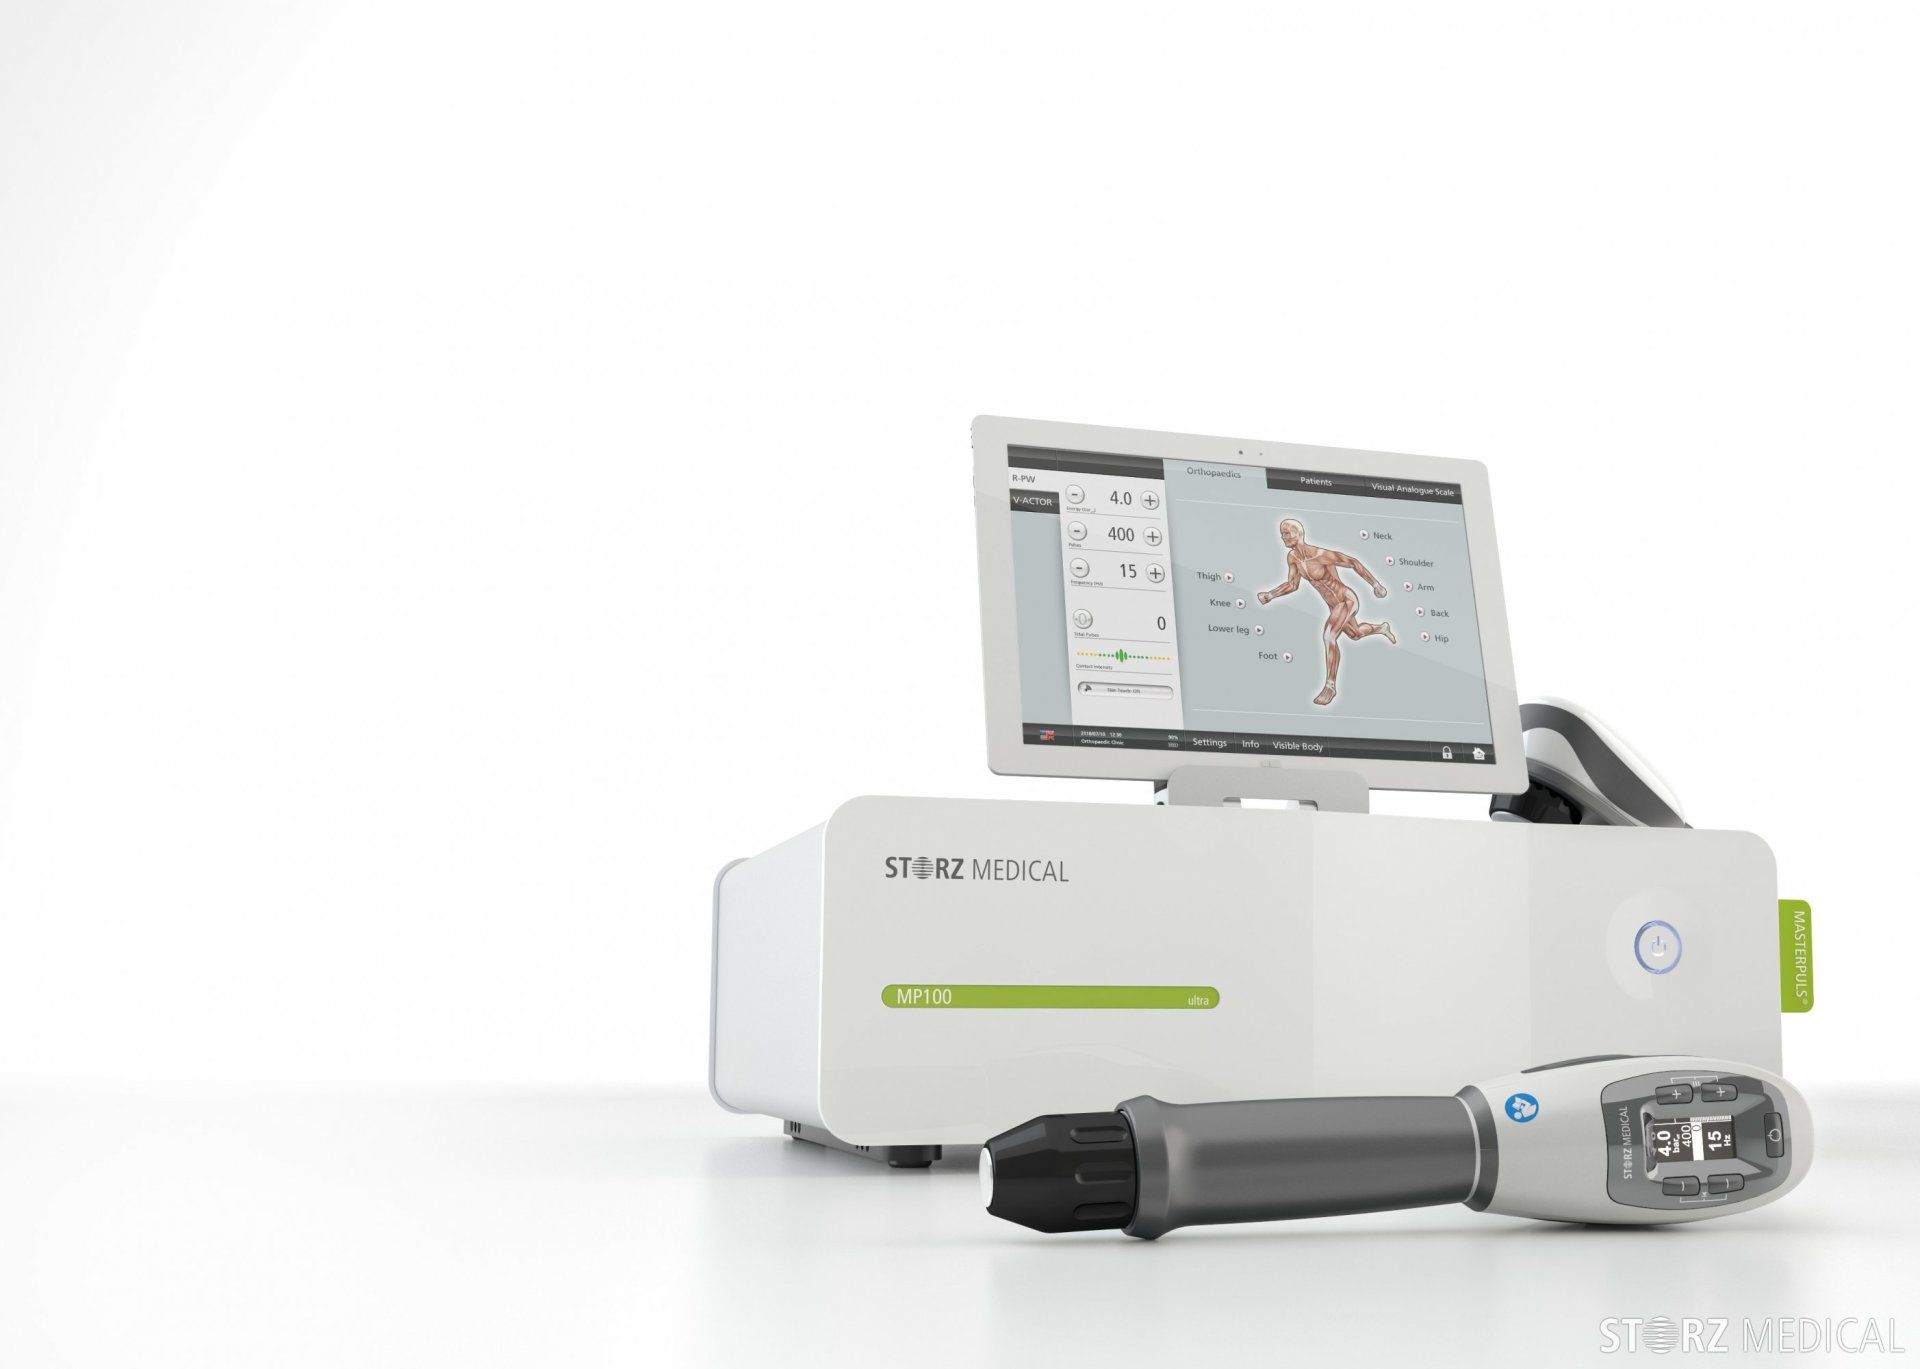 Shocwave Therapy Unit by Storz Medical